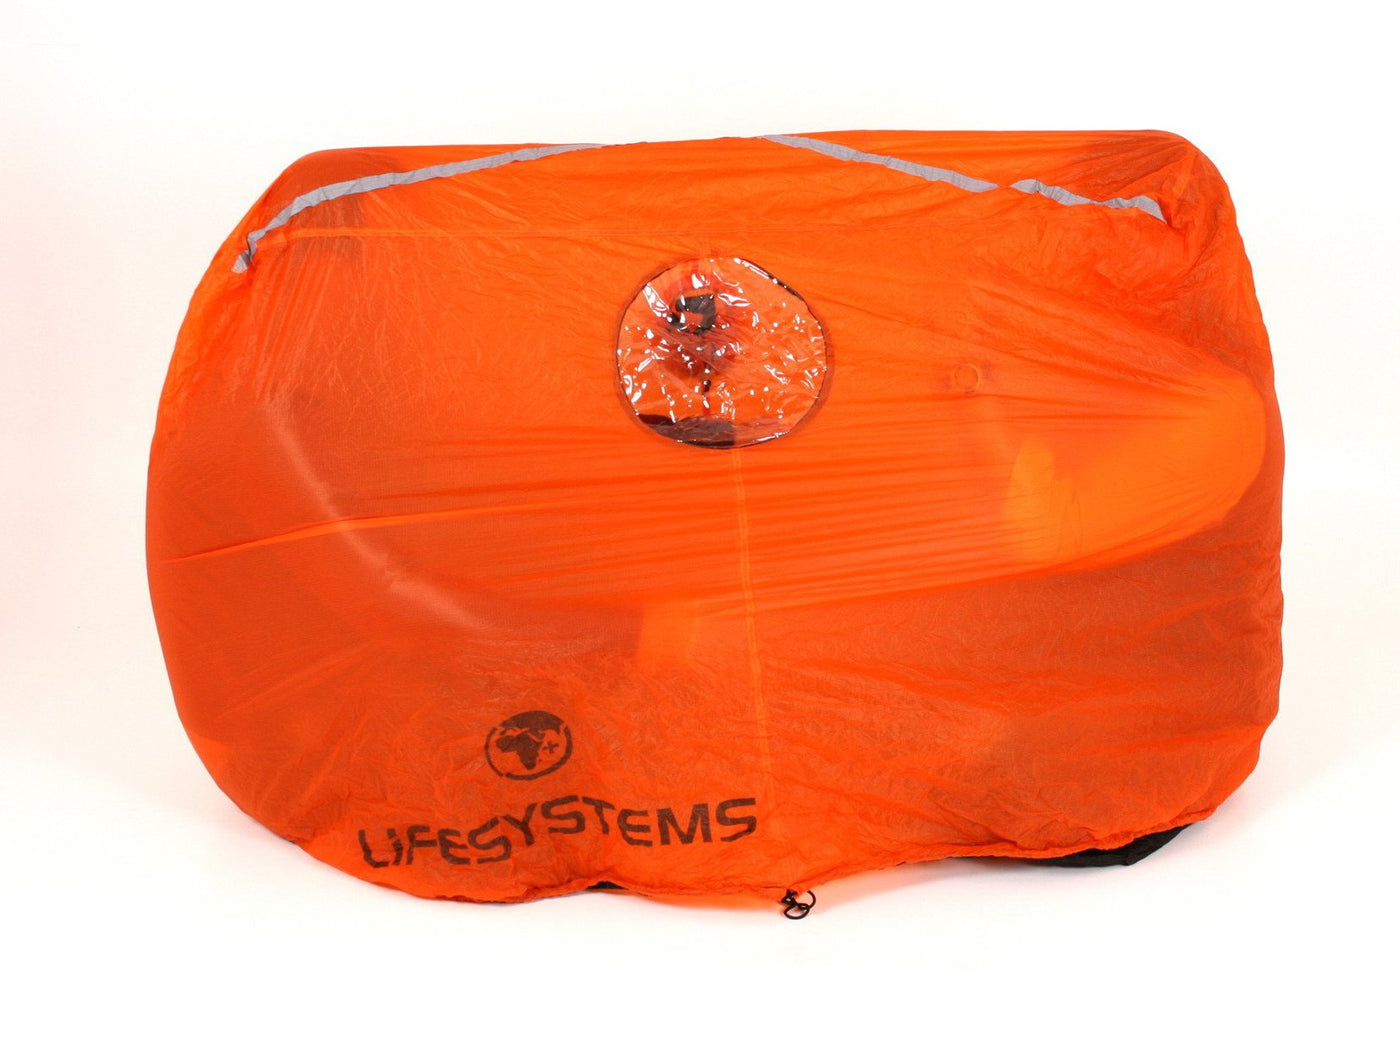 Lifesystems Survival Shelter 2 Person | Safety Gear For Tramping | NZ